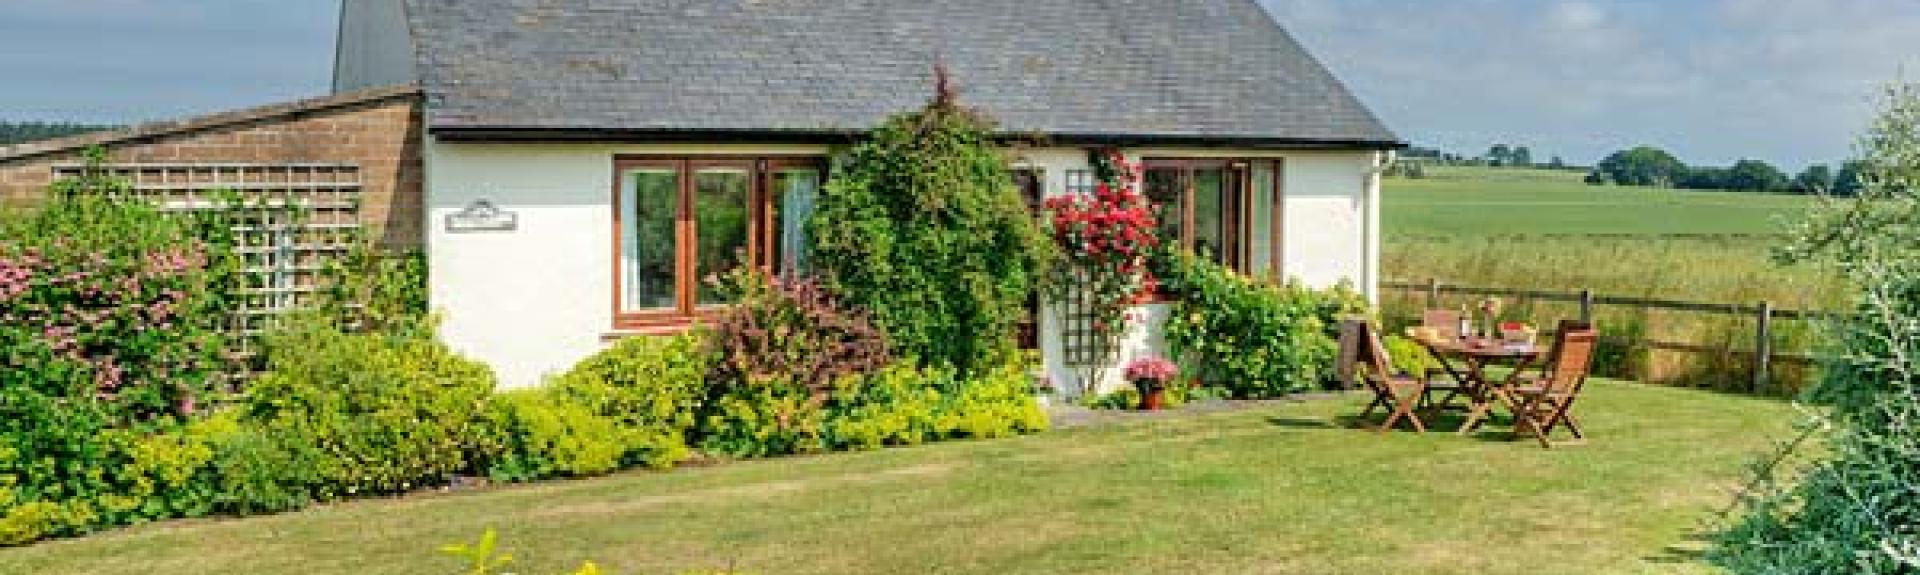 A holiday bungalow with a flowerbeds and a lawn surrounded by open fields.